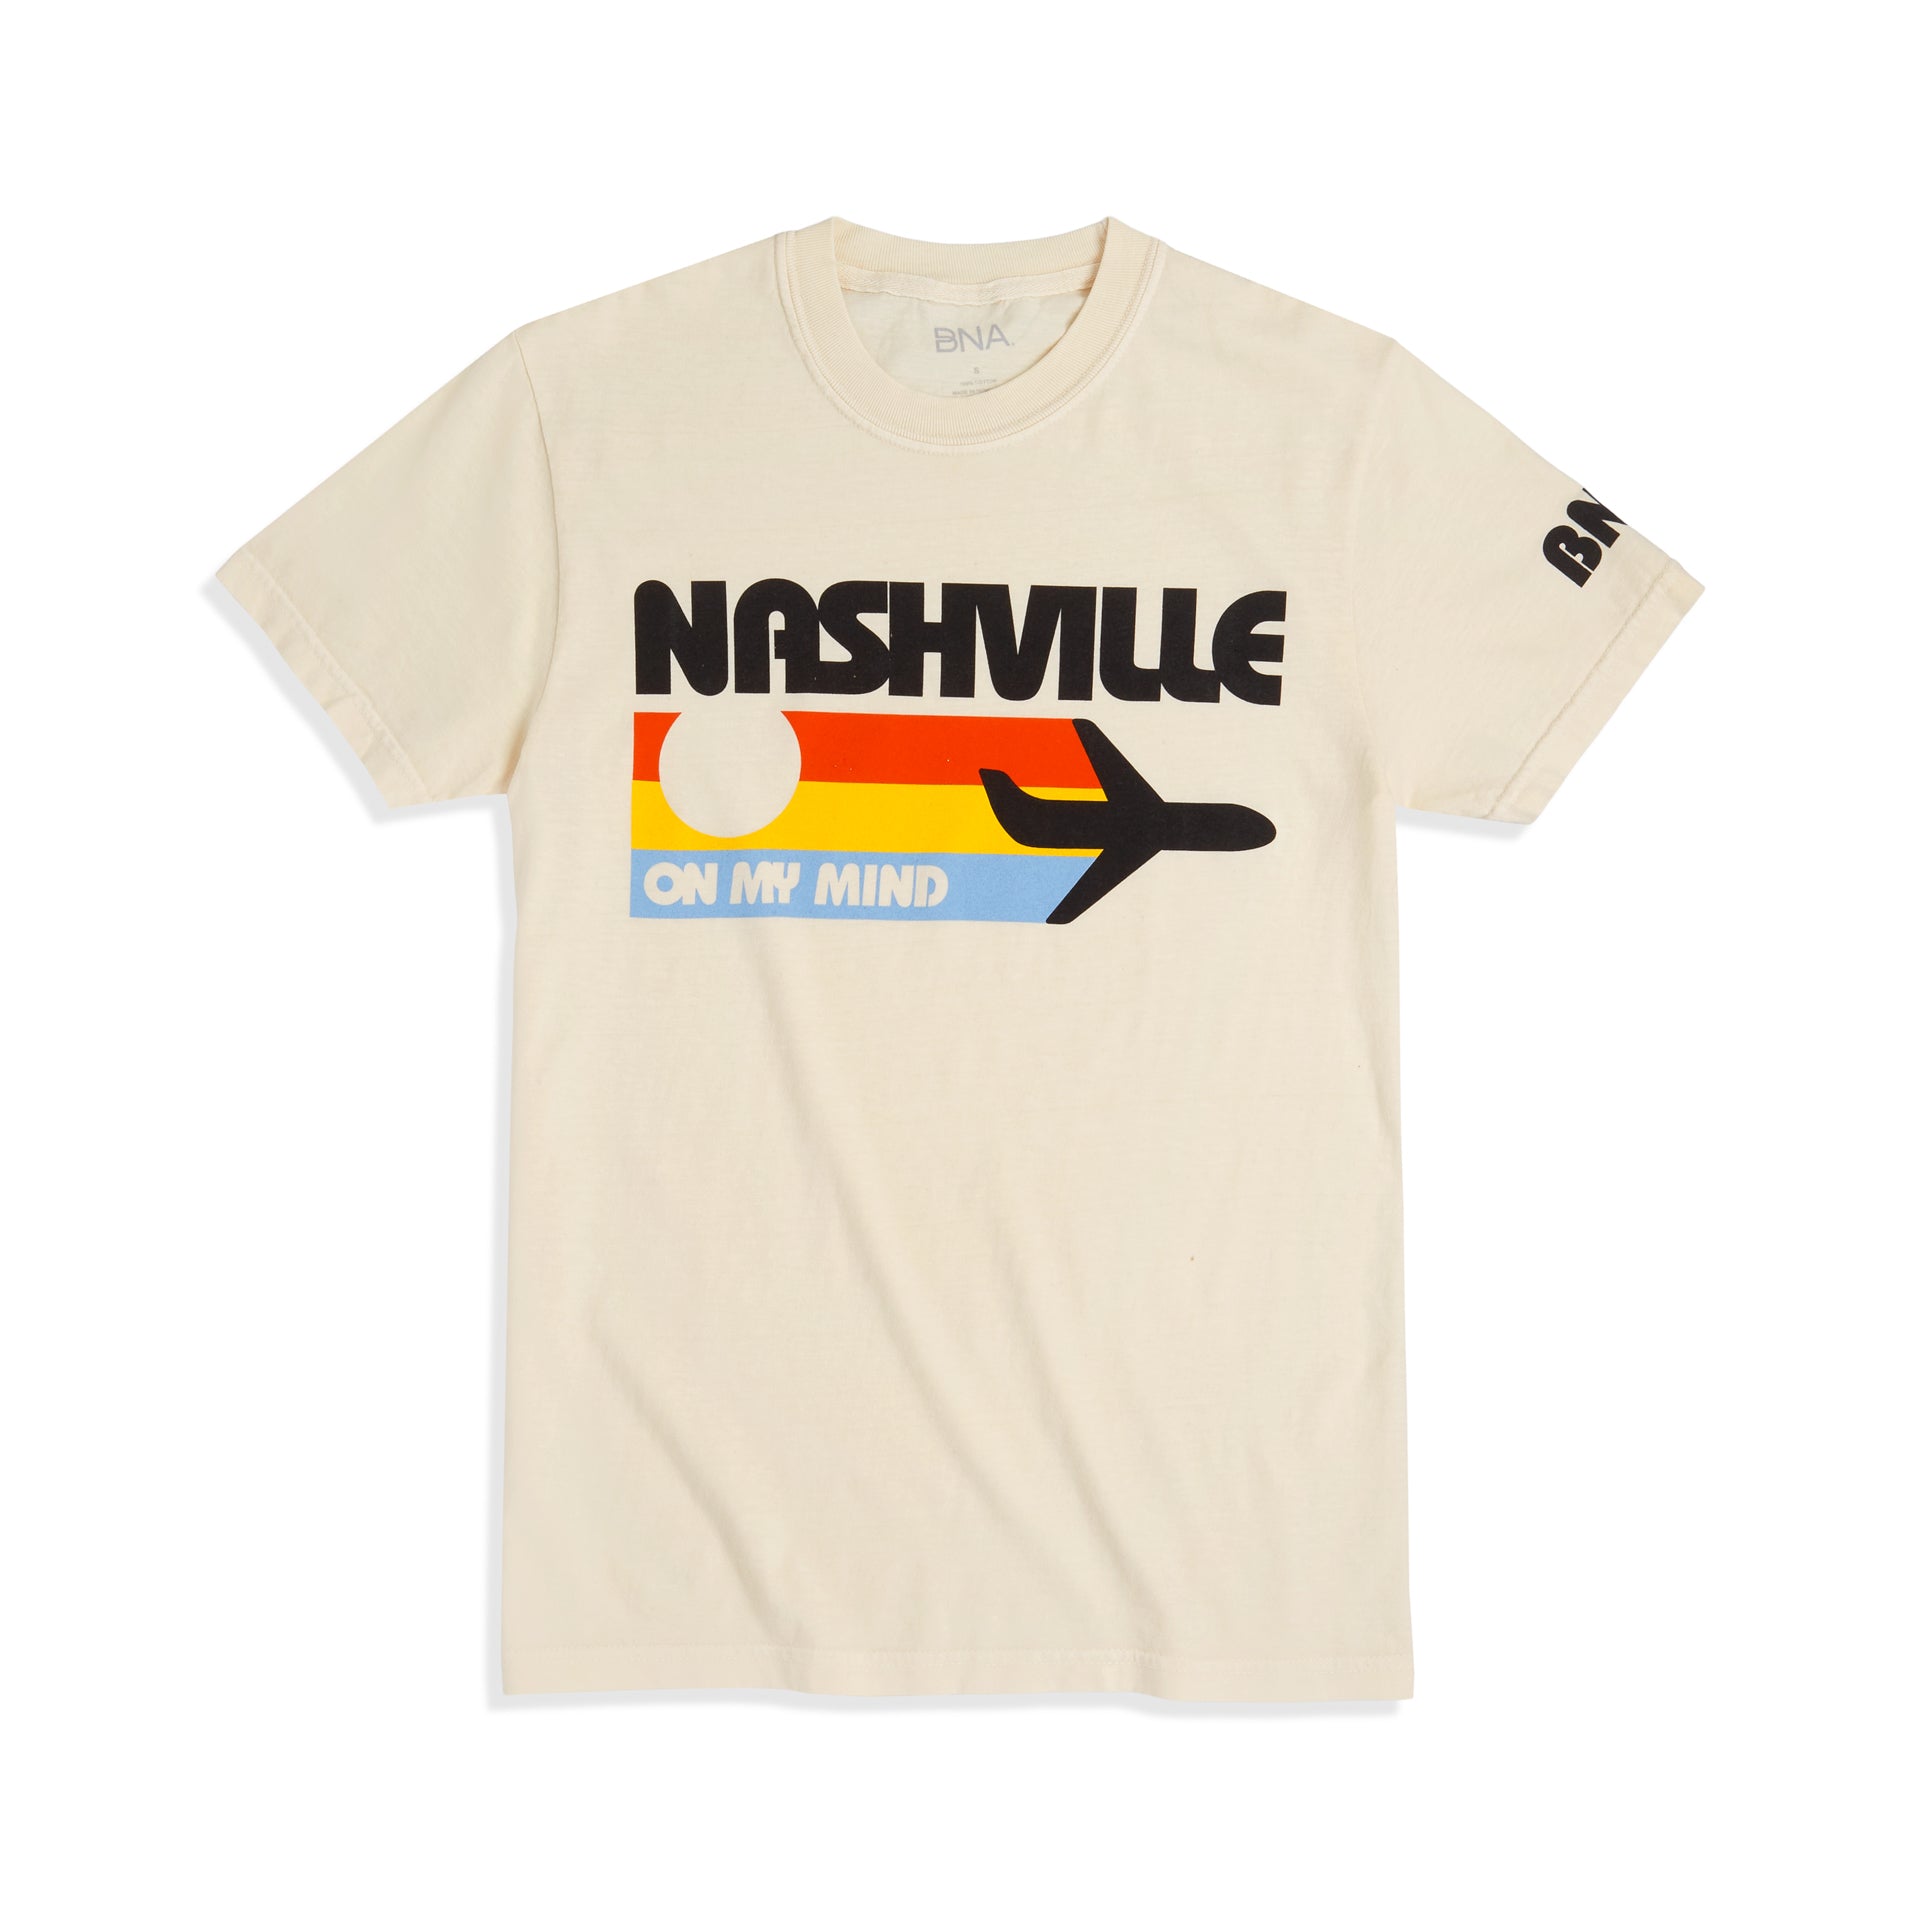 Cream t-shirt with large chest graphic depicting a black plane and three vintage stripes in orange, yellow, and light blue.  Tee reads "Nashville on my mind" in retro bubble letters and BNA on the sleeve.